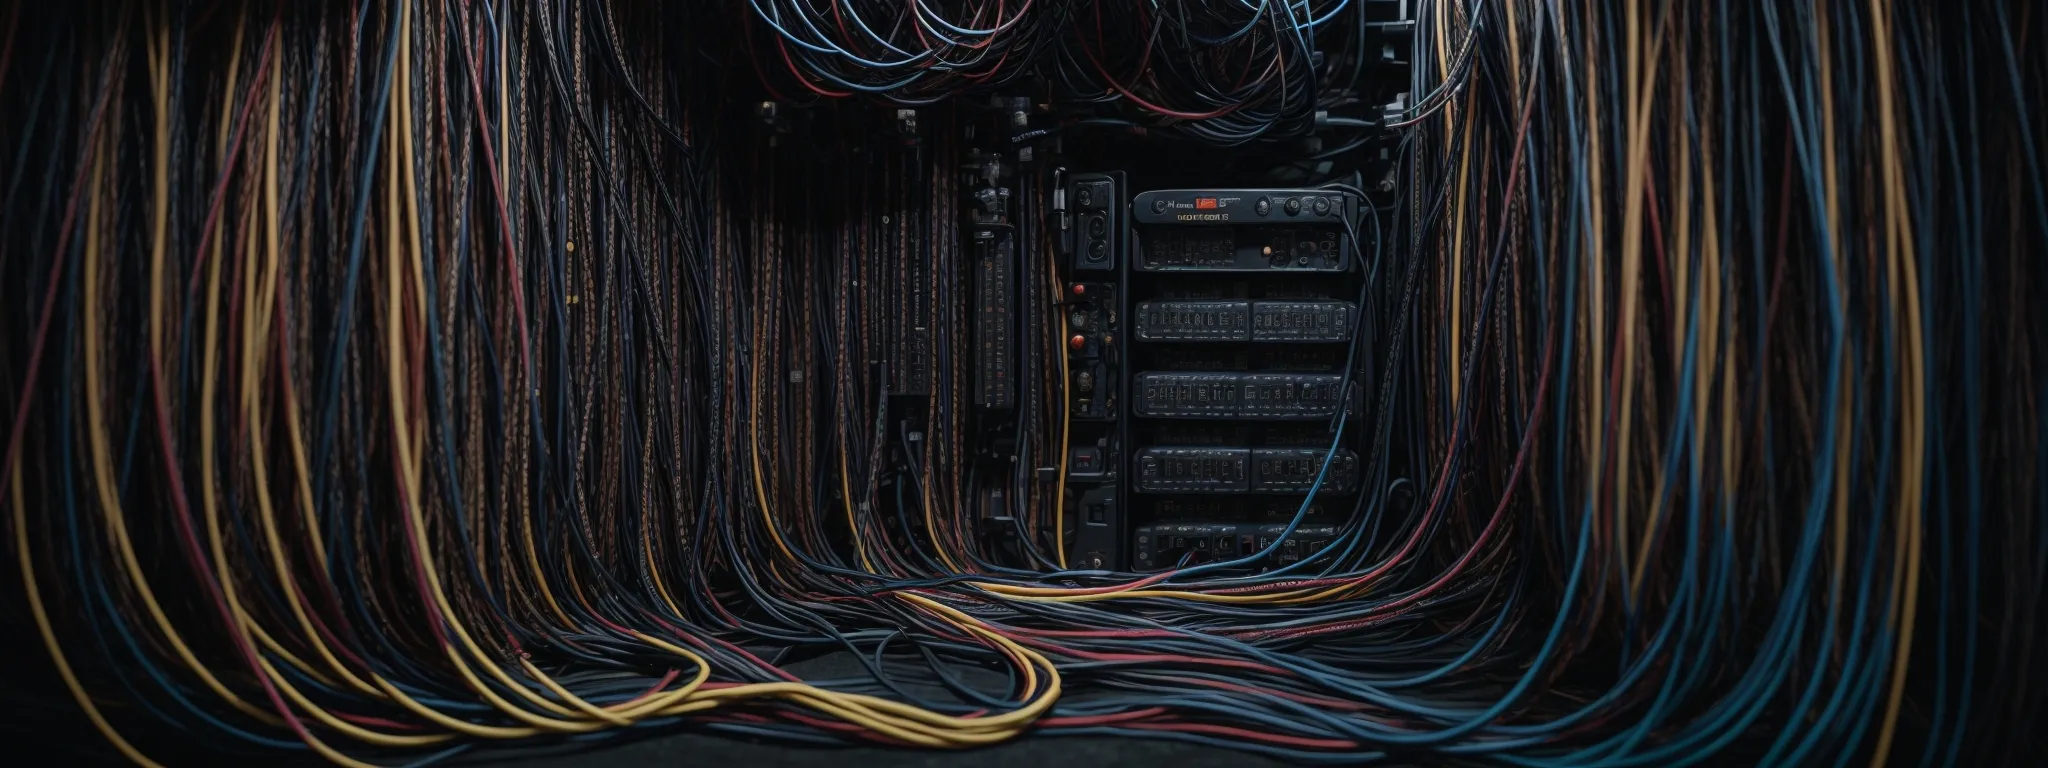 numerous intersecting data cables plugged into a centralized hub, symbolizing integrated connectivity.